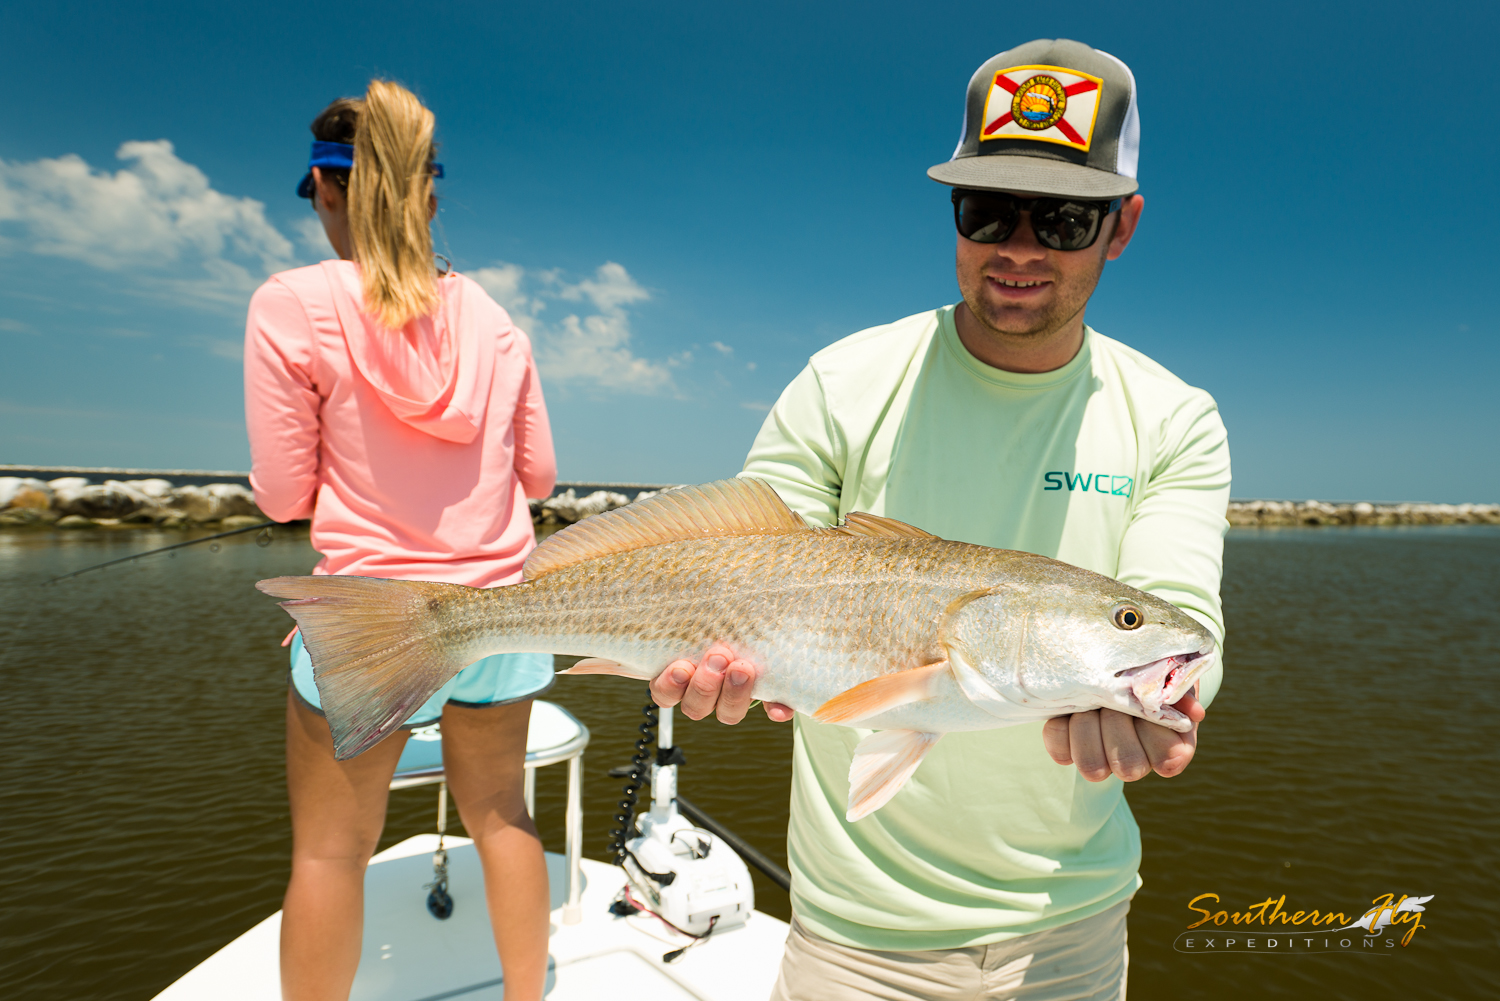 Fly Fishing New Orleans with the best redfish guide in louisiana - Southern Fly Expeditions 